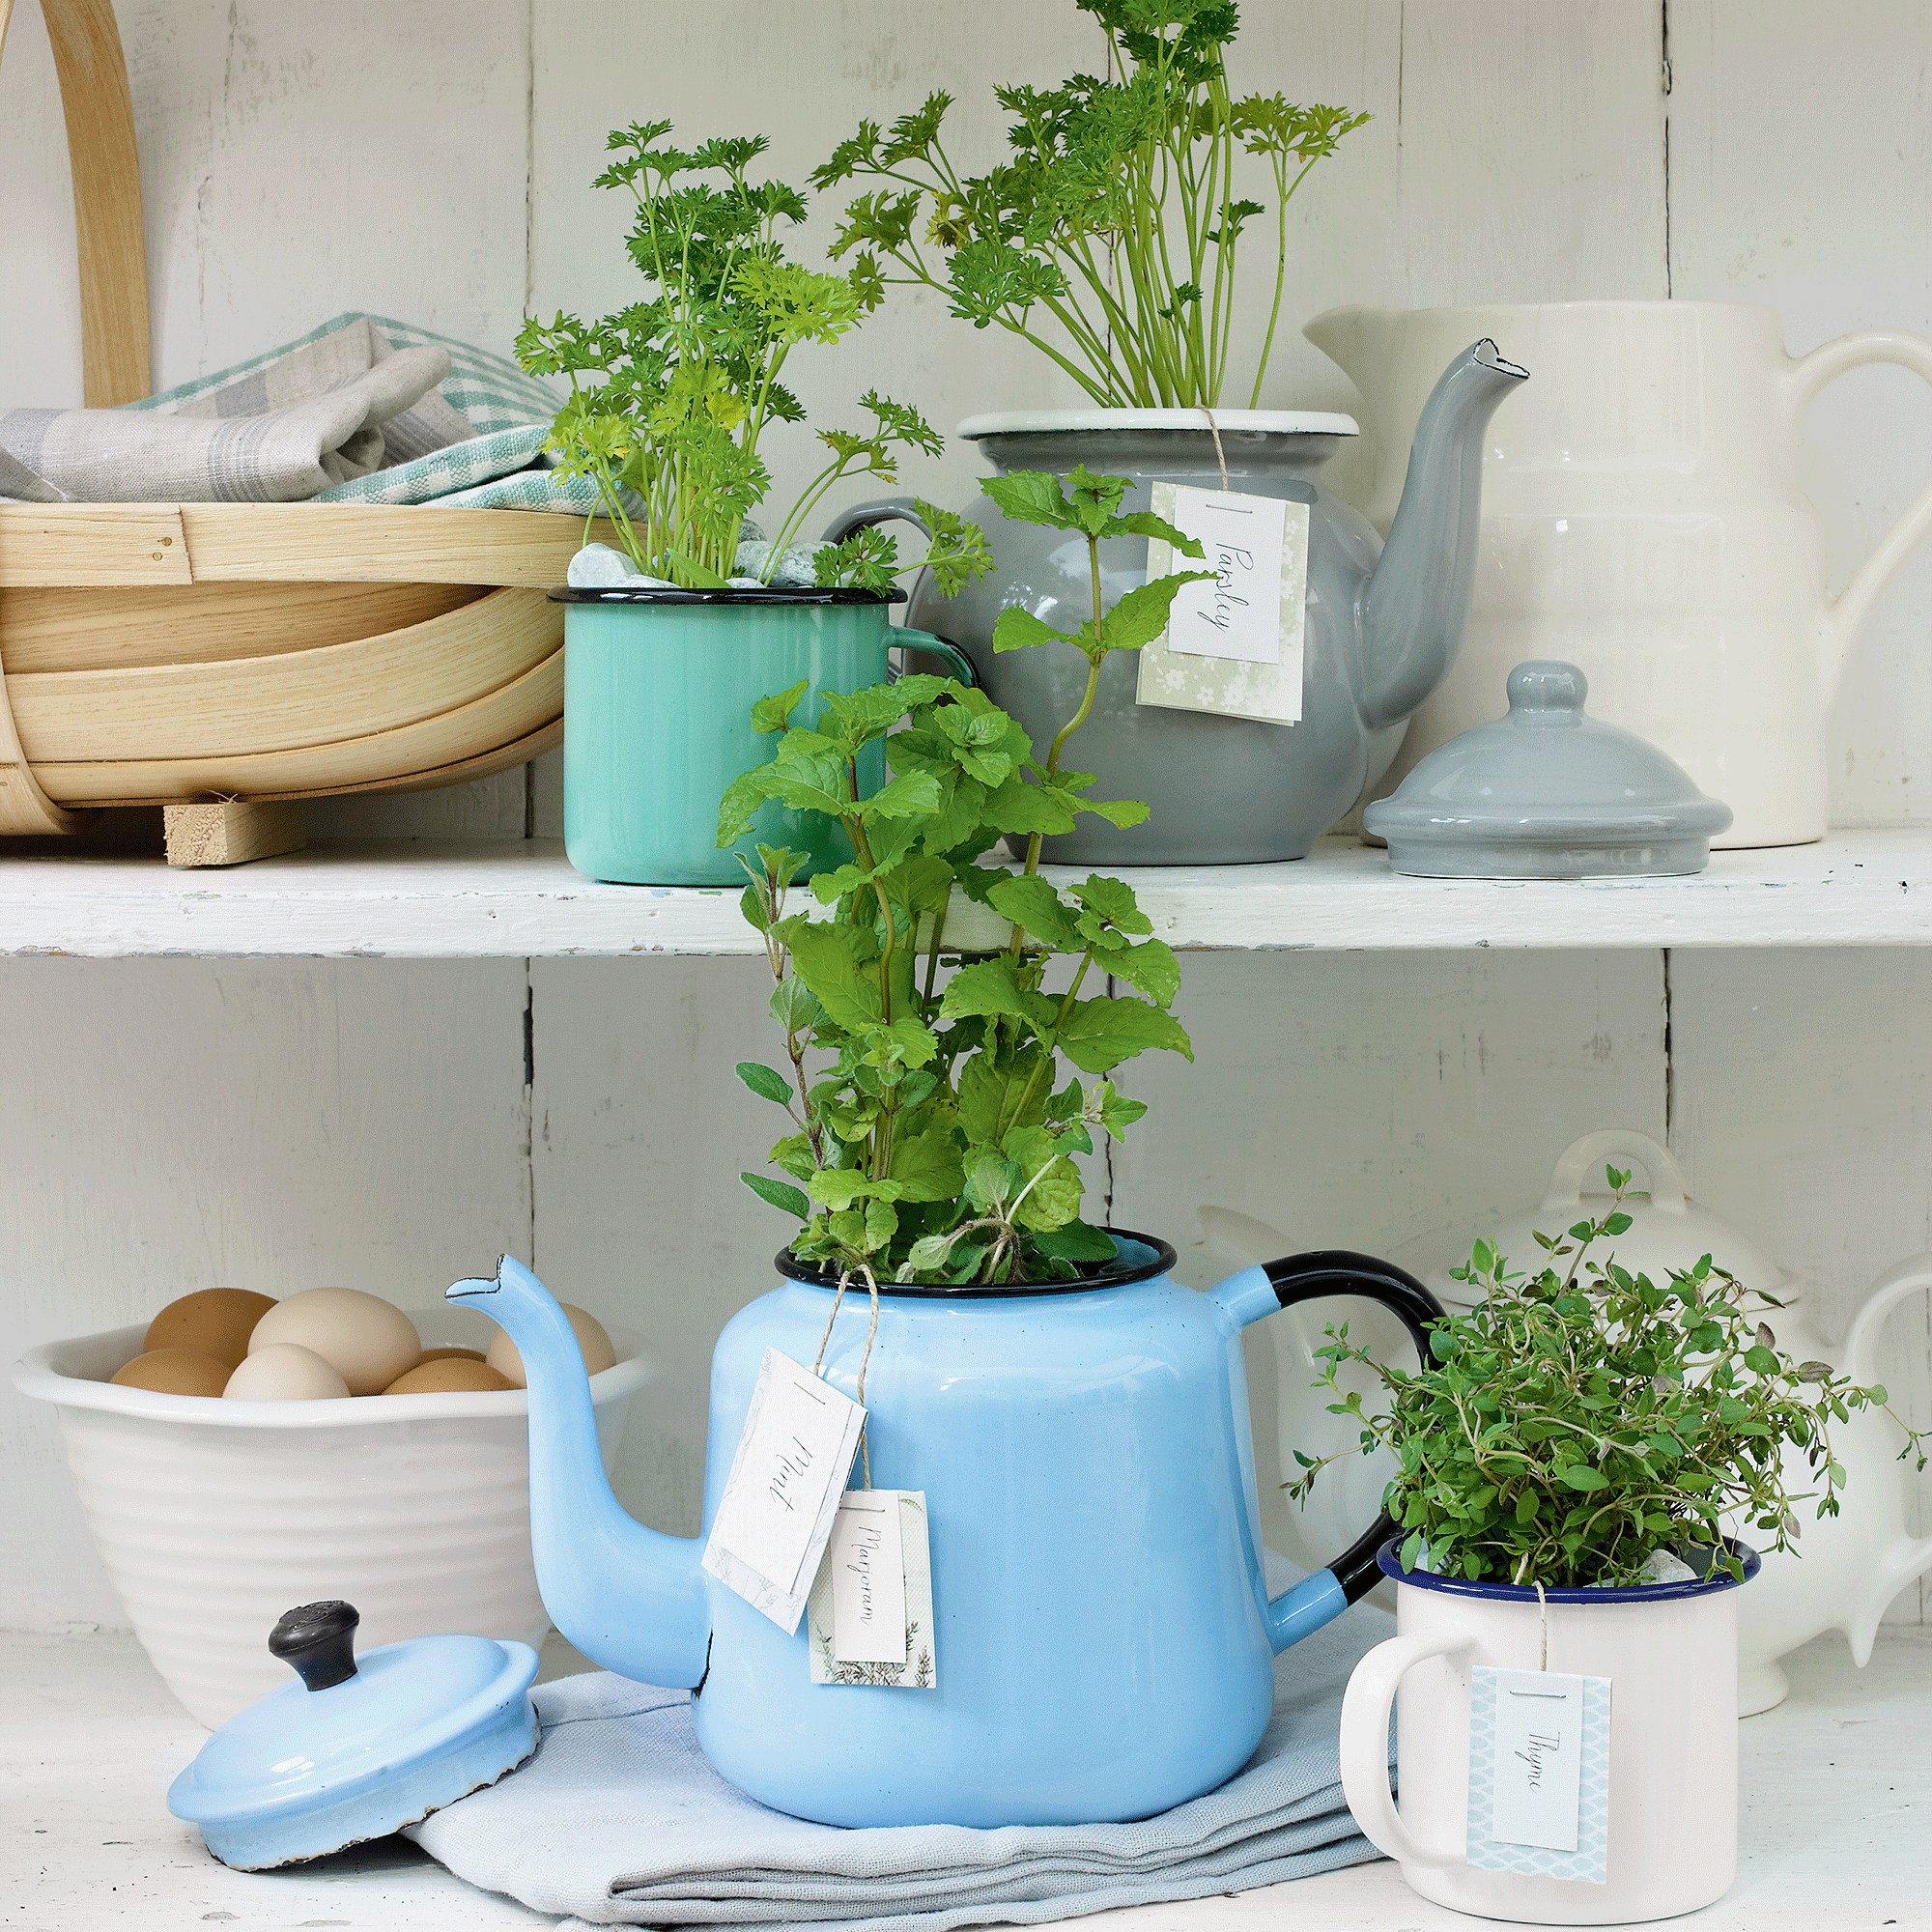 Herbs in teapots and teacups